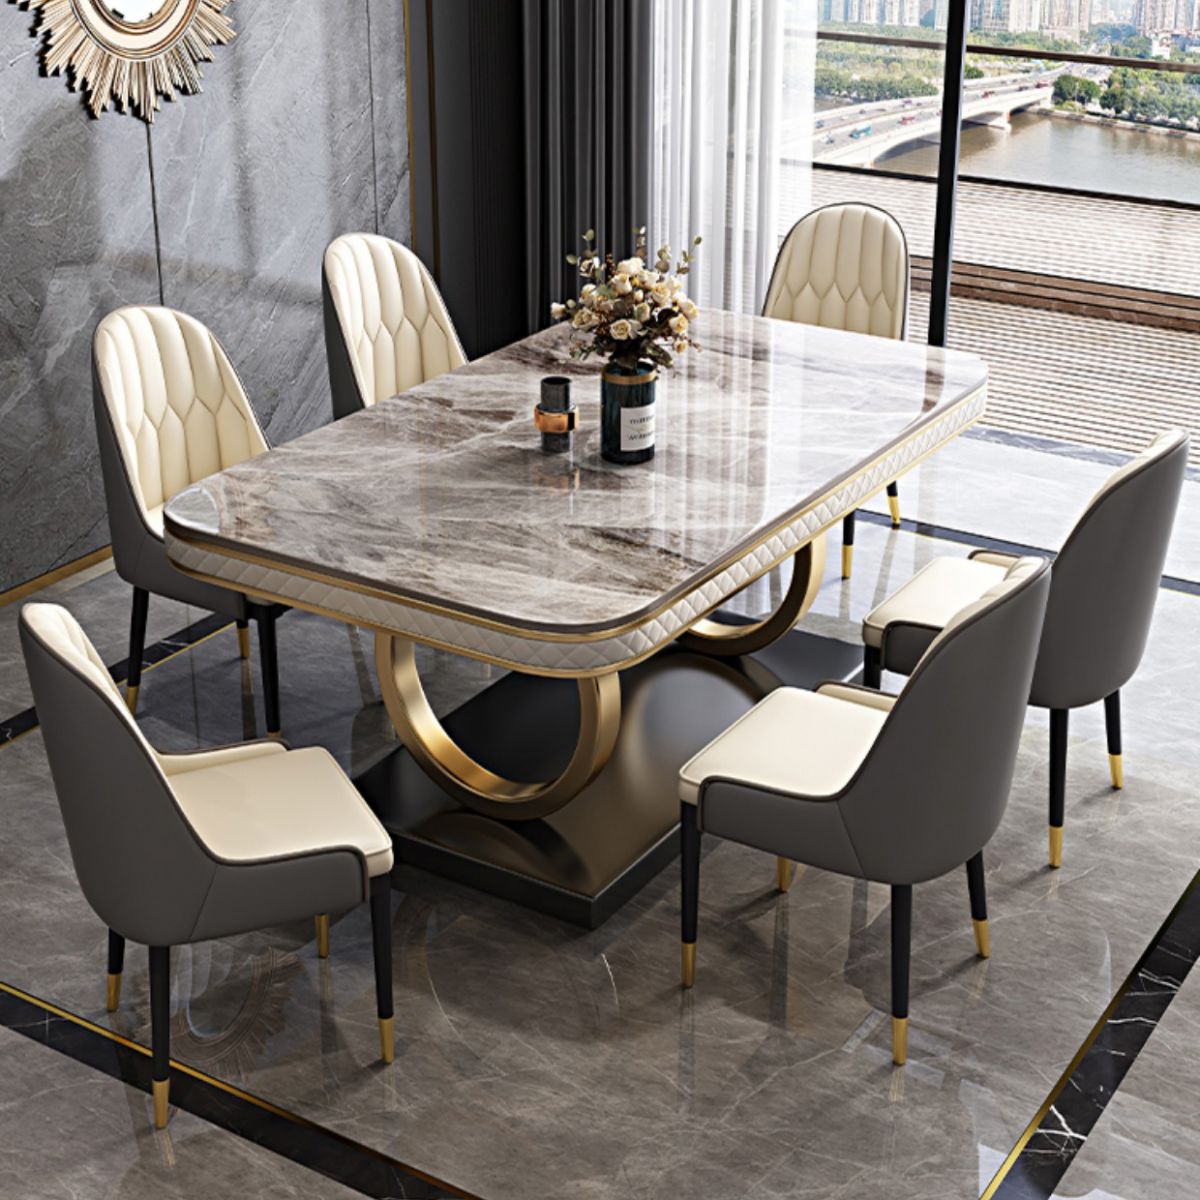 Rectangle Table Traditional Luxury Dinner Room Furniture with Metal Base